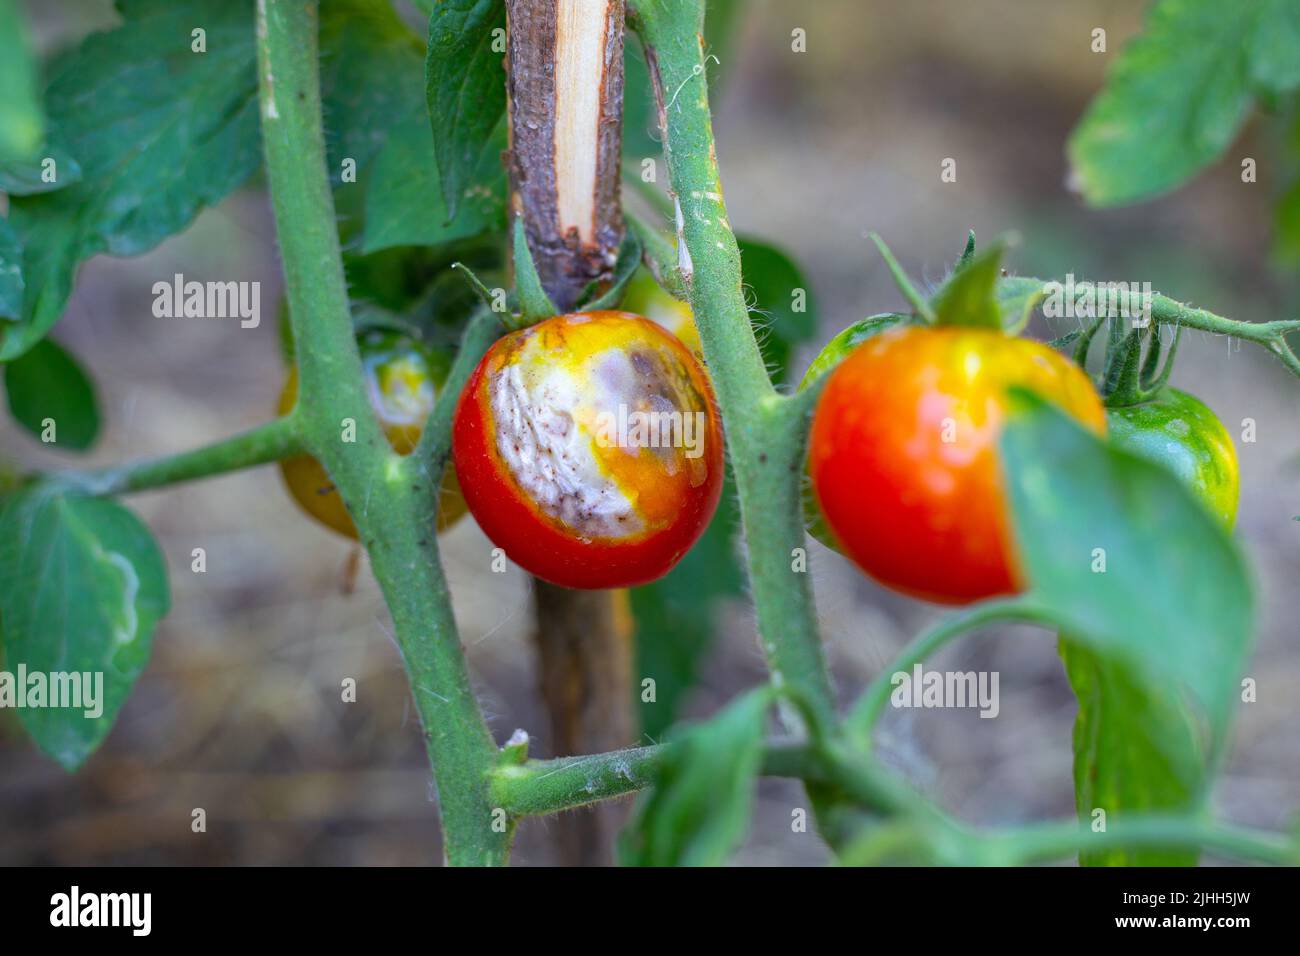 On the bush is a ripening tomato with spots, affected by late blight. Fungal diseases of tomato, prevention and care. Selective focus. Stock Photo